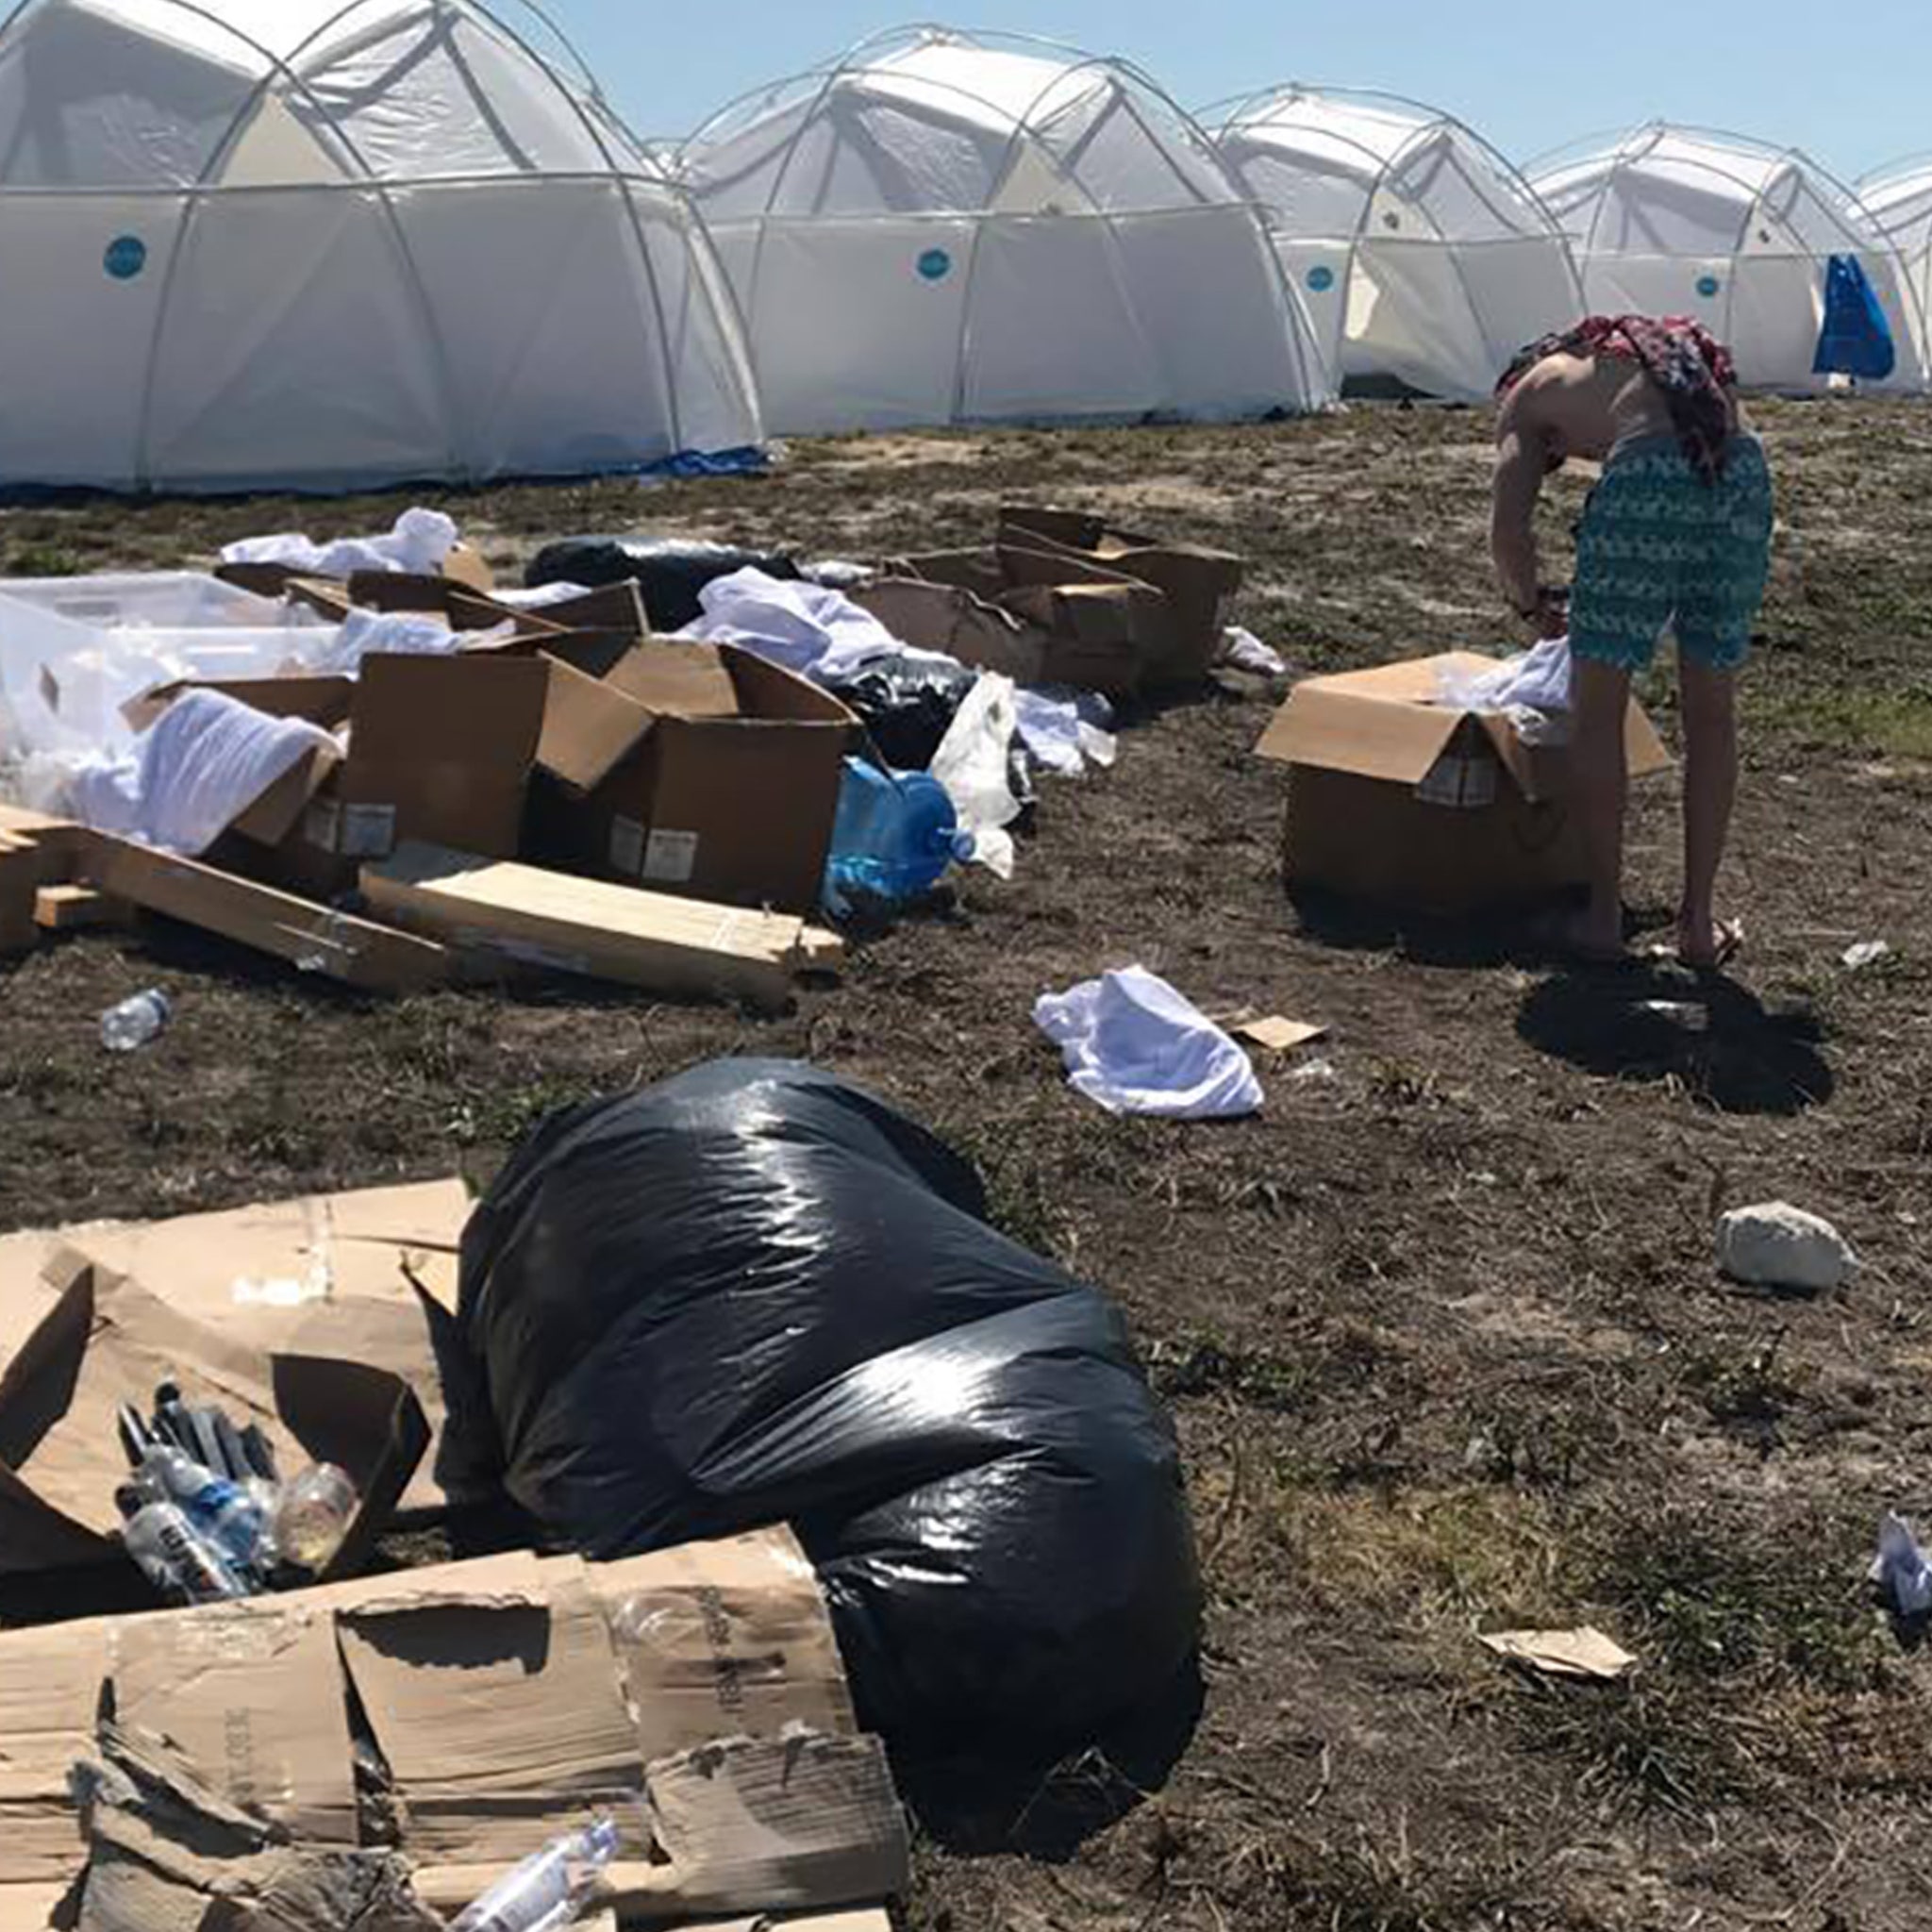 4 Reasons Ja Rule's Fyre Festival Is Being Compared to an Awful Episode of  'Survivor' (Photos)